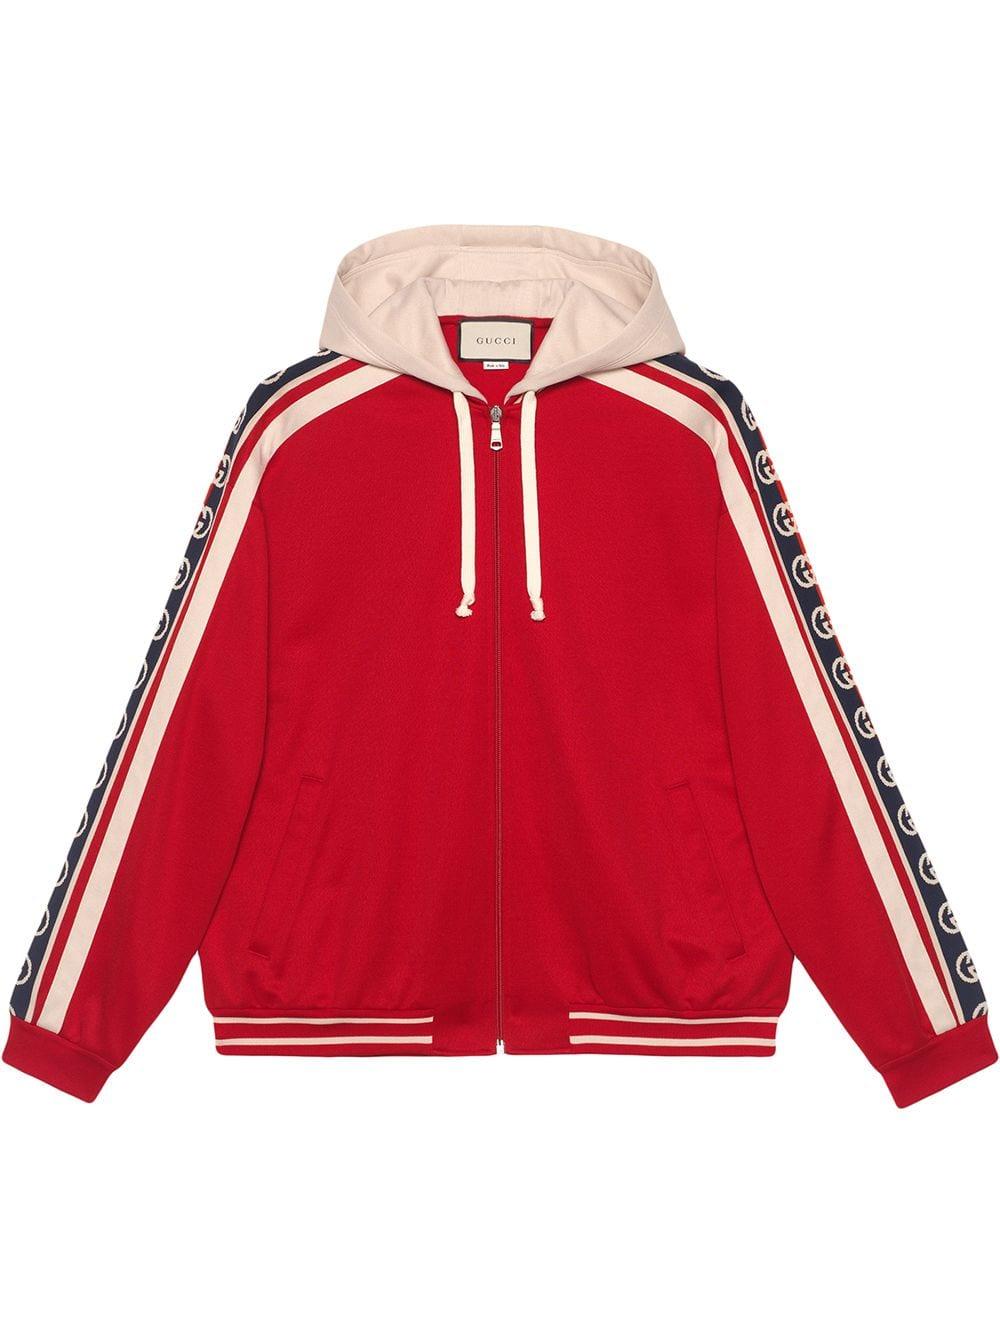 Gucci Synthetic Technical Jersey Bomber Jacket in Red for Men - Save 11 ...